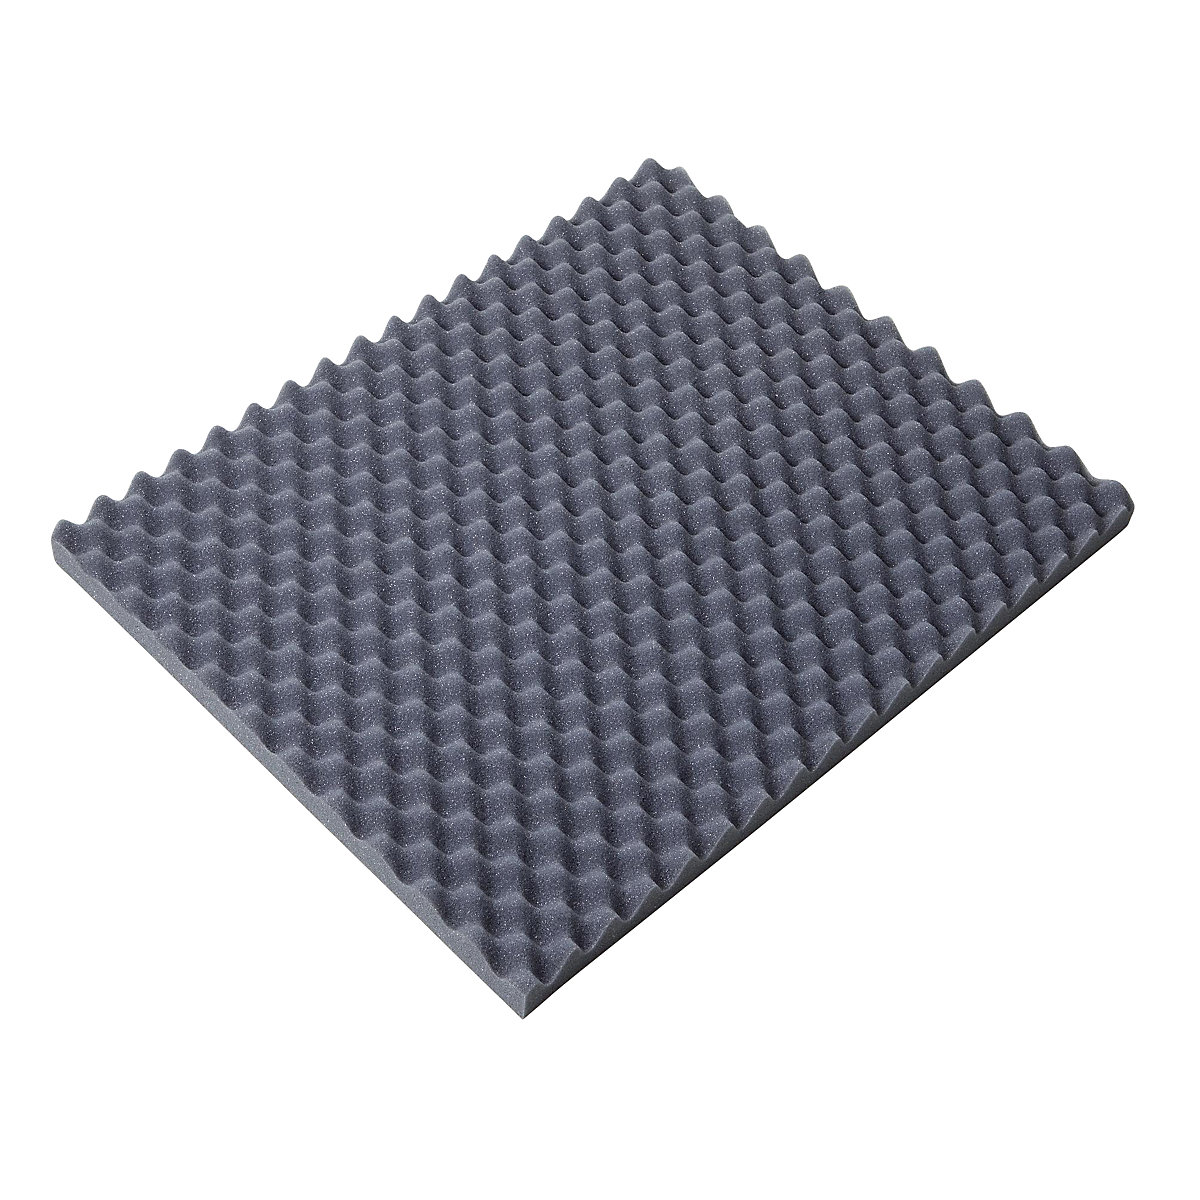 Egg crate foam sheet, 40 mm thick, LxW 500 x 300 mm, pack of 26-3